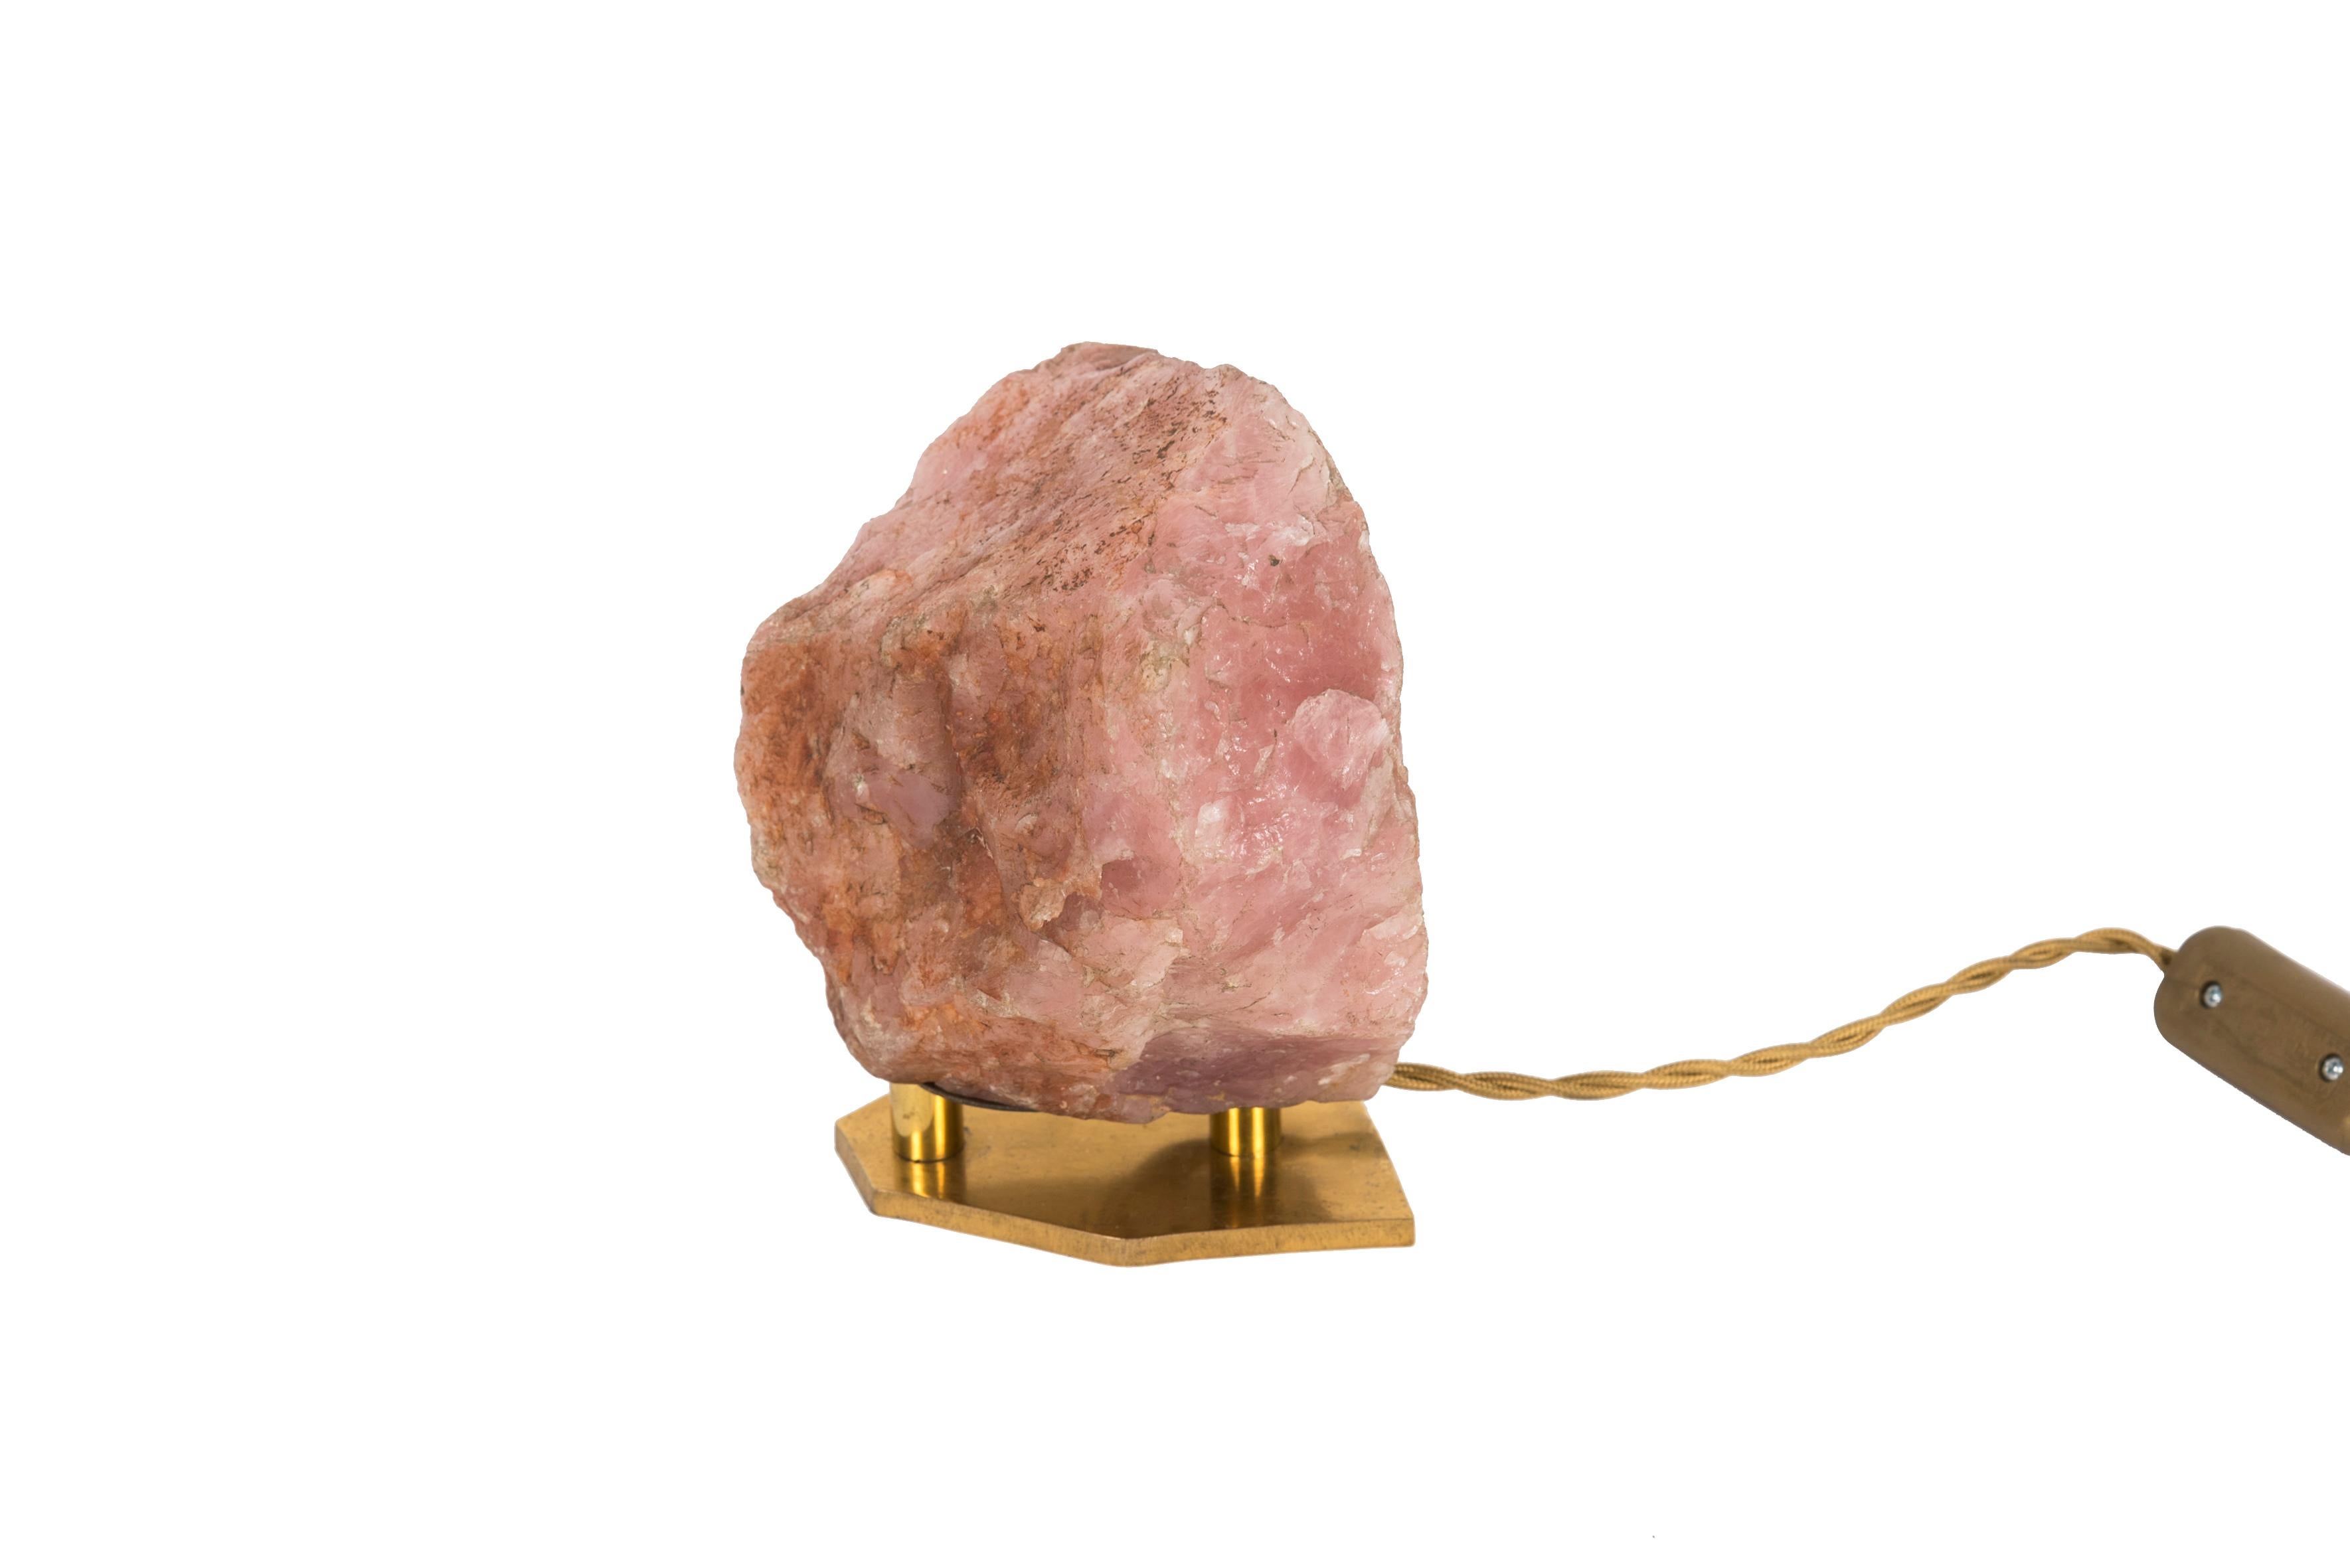 Very nice table lamp with a pink quartz in the style of Jean-Michel frank
Bronze base.